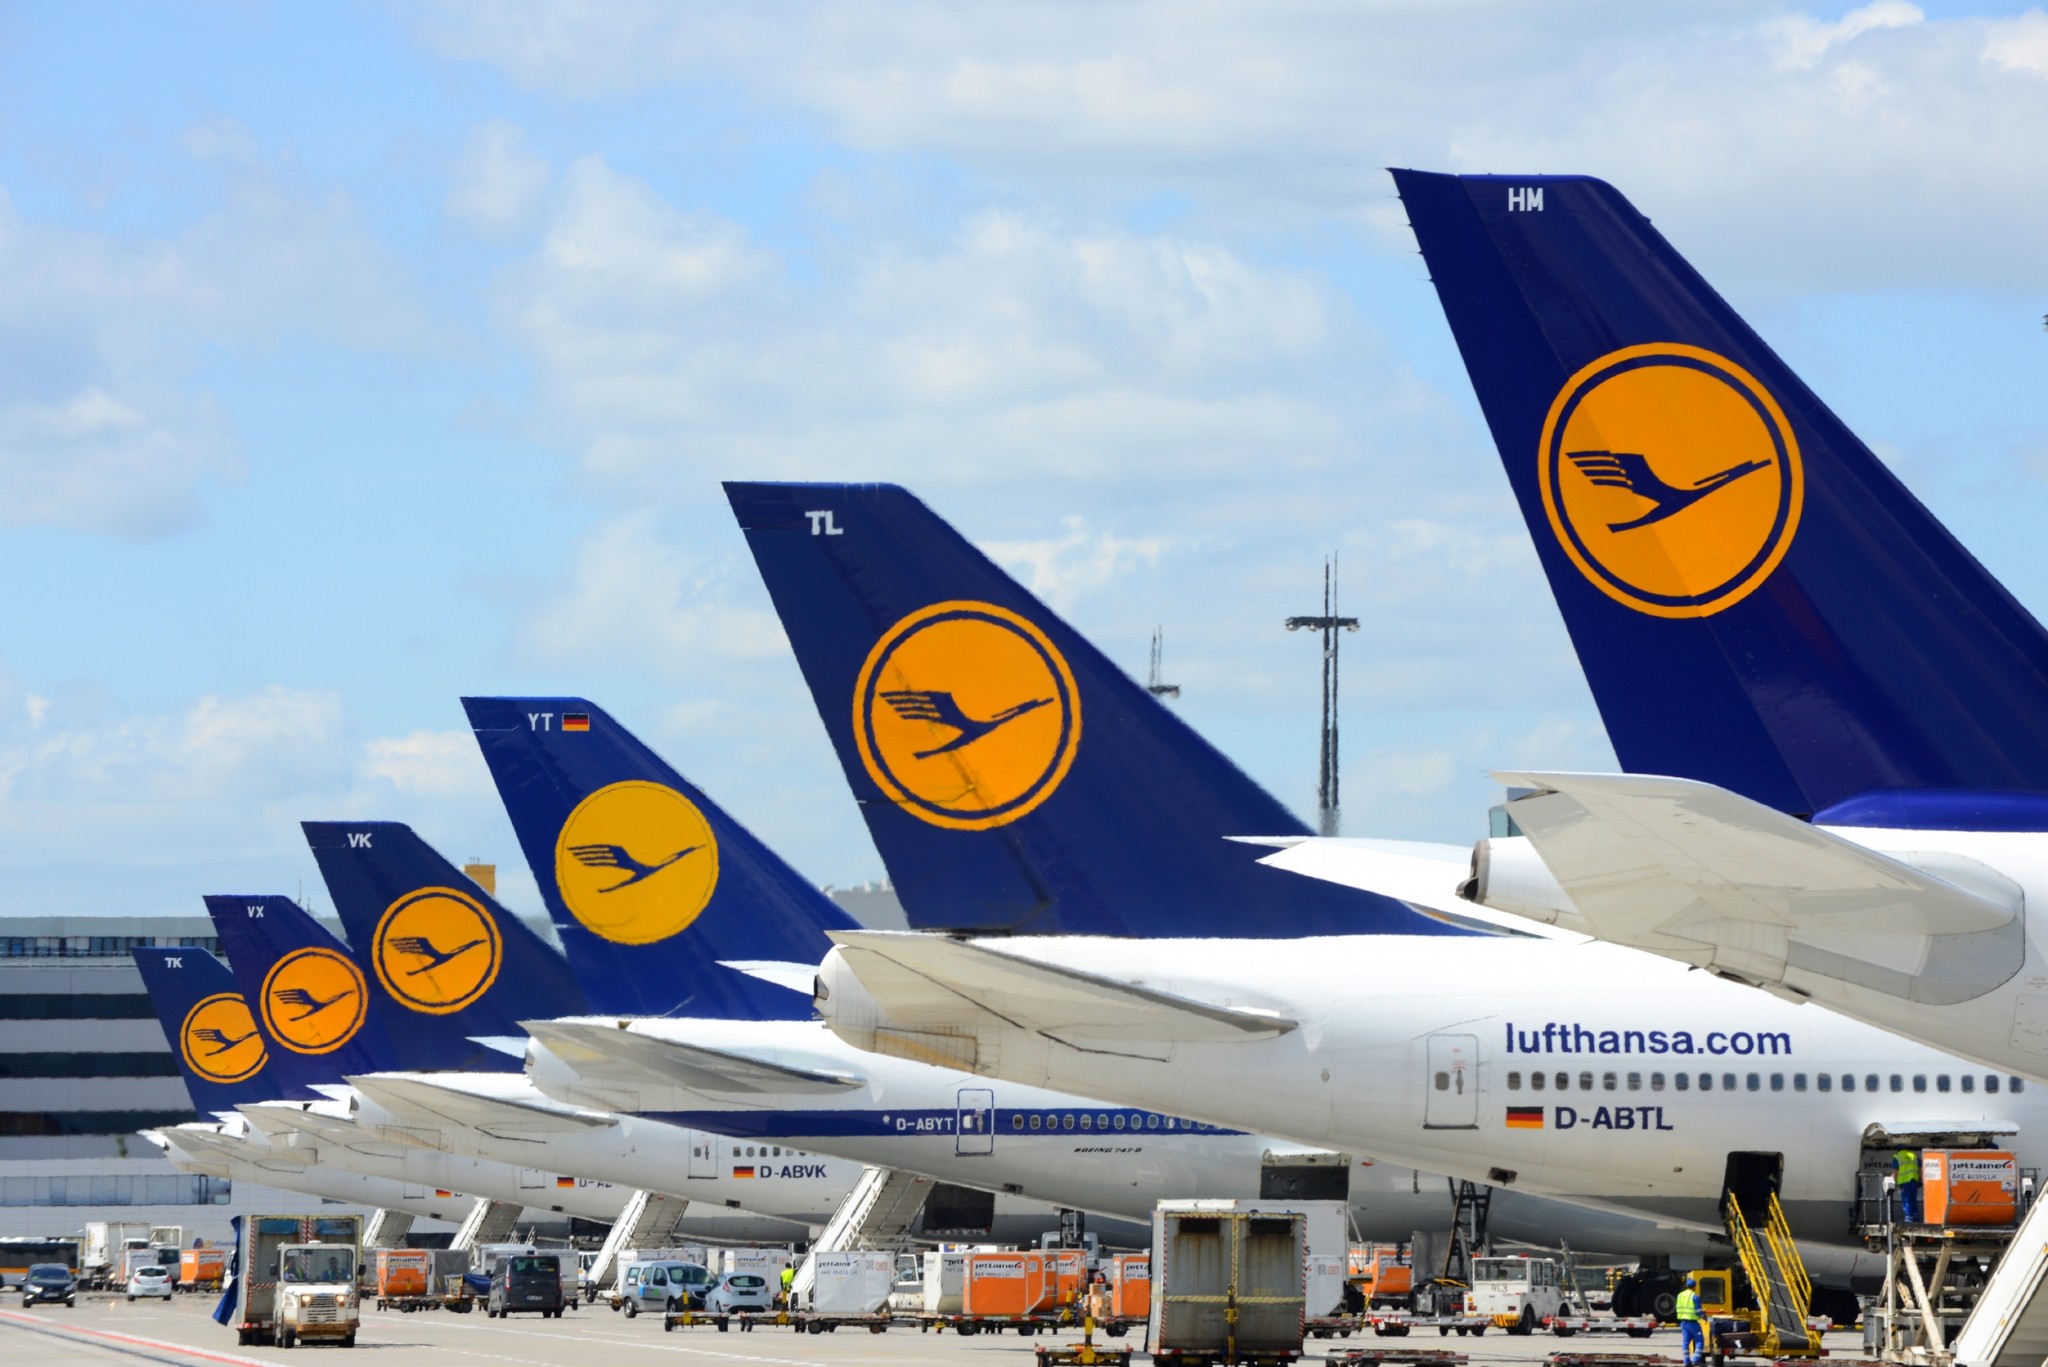 Lufthansa Group to resume flights from the UK and Ireland